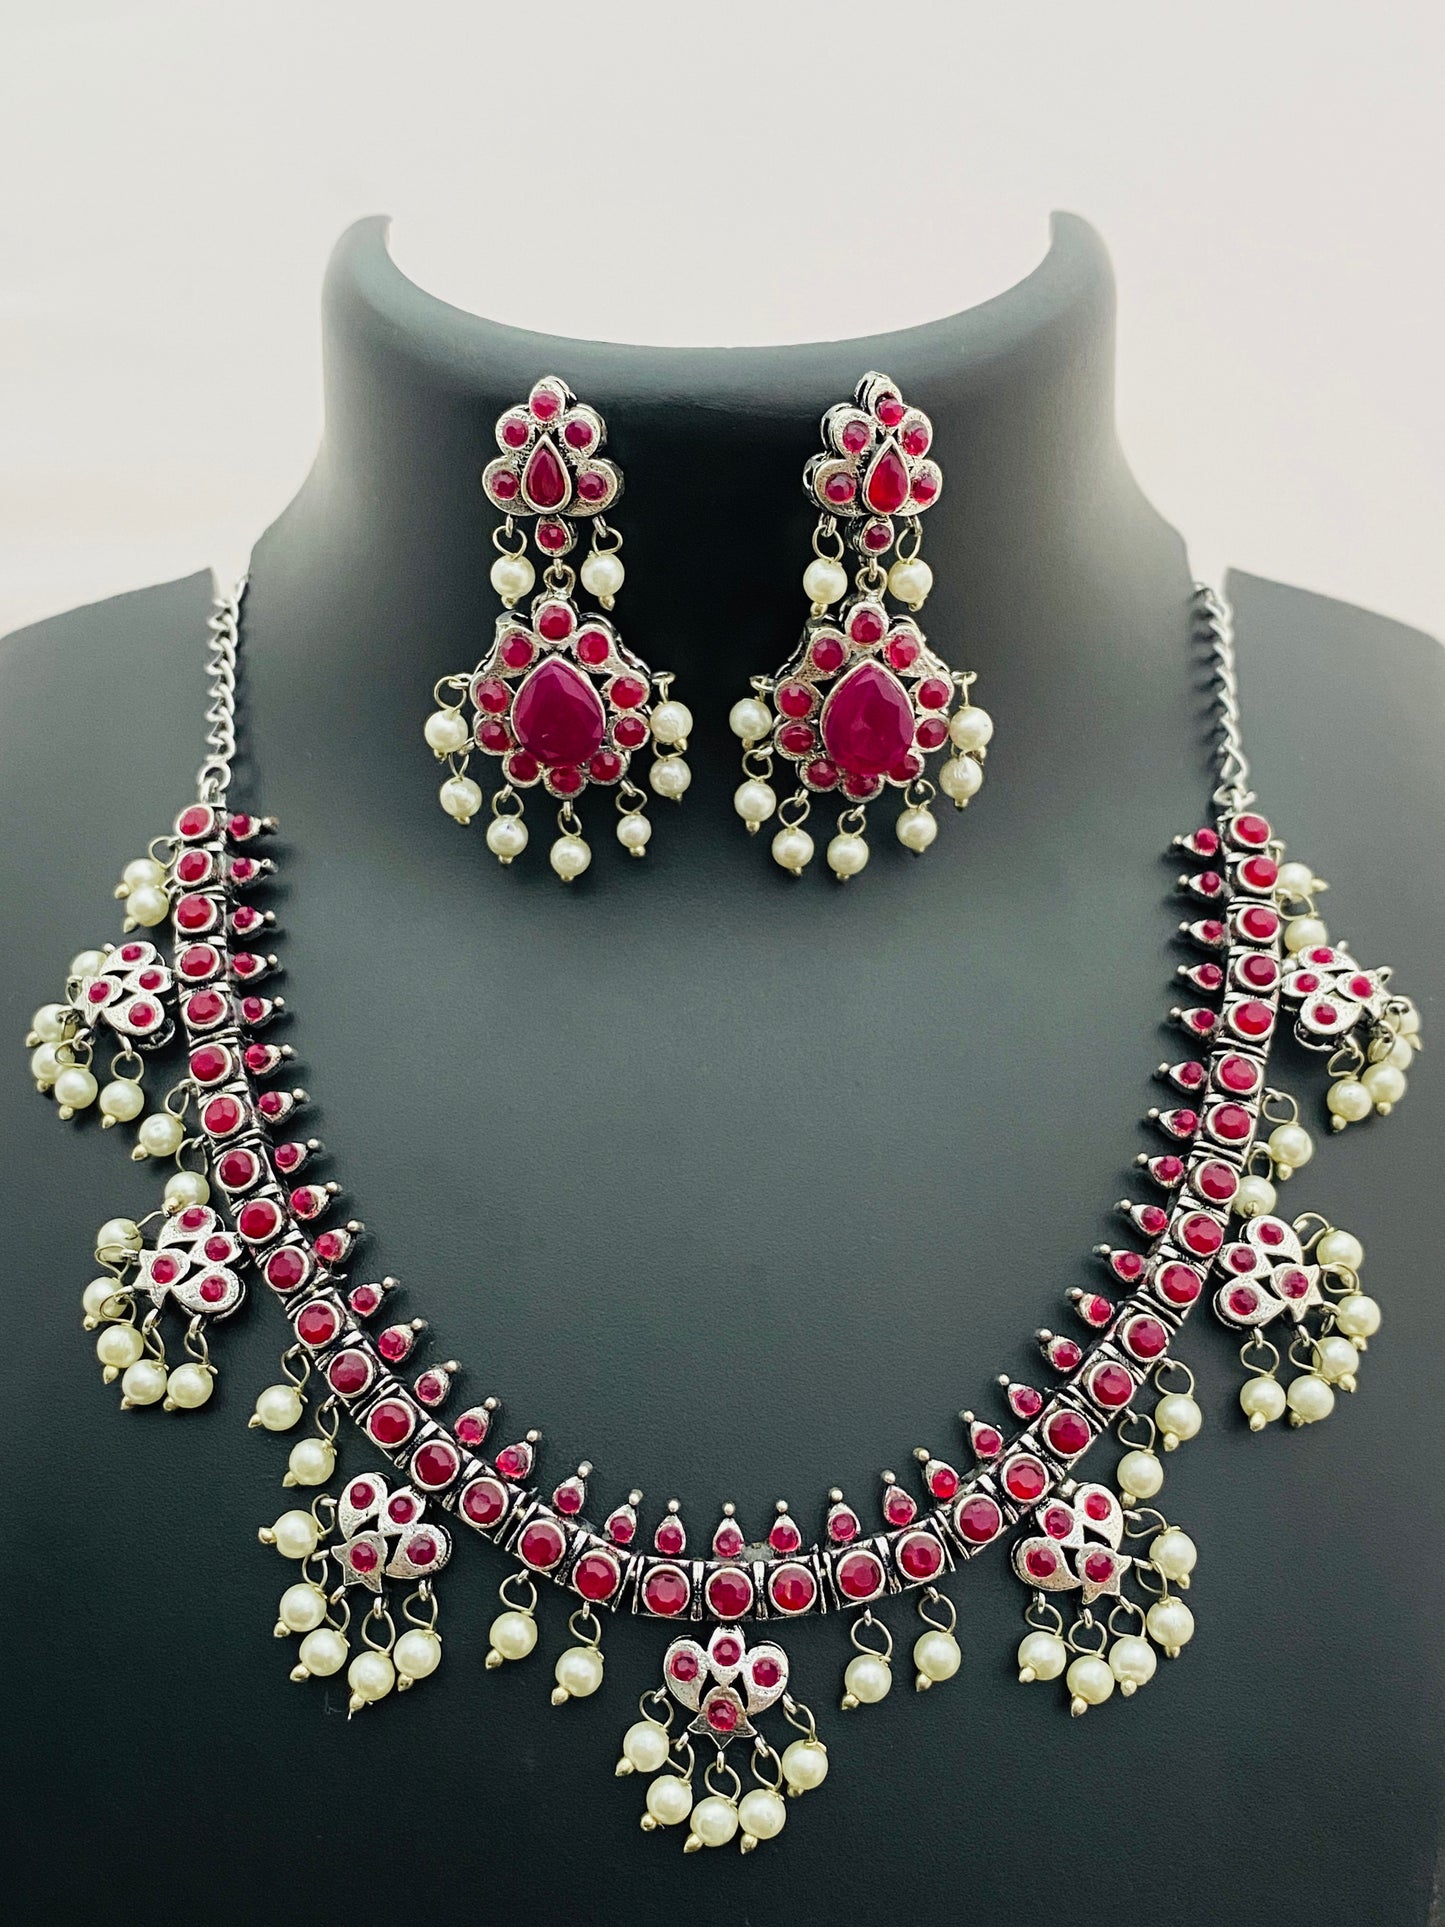 Alluring Ruby Stone Studded Flower Design Silver Toned Oxidized Necklace Set With Earrings